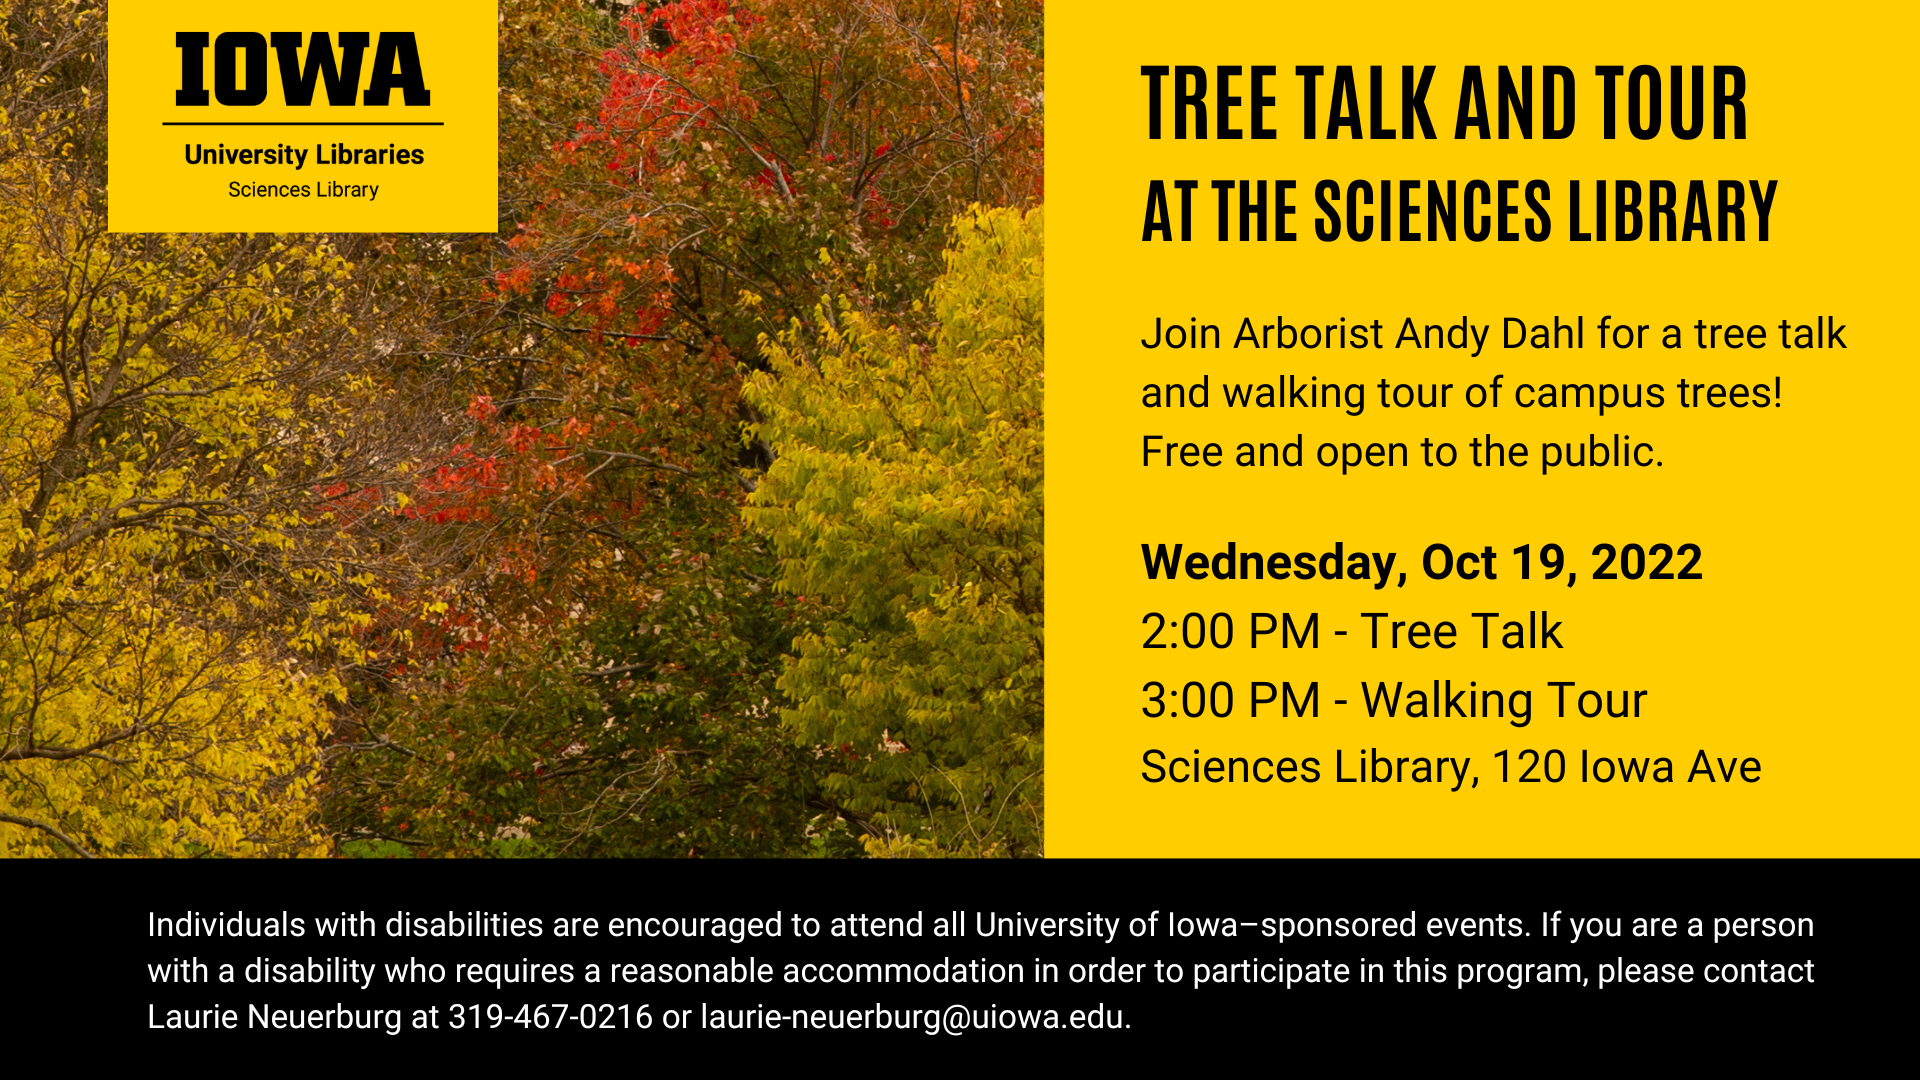 Join Arborist Andy Dahl for a tree talk and tour at the Sciences Library! This program will be held on Wednesday, October 19, 2022. The tree talk will begin at 2:00 PM on the 3rd floor of the Sciences Library. The walking tour of campus trees will begin at 3:00 PM at the Sciences Library. This program is free and open to the public. The Sciences Library is located at 120 Iowa Ave.  Tree Talk & Tour at the Sciences Library 120 Iowa Ave, Iowa City Wednesday, October 19, 2022 • 2:00 PM: Tree talk located on the 3rd floor of the Sciences Library • 3:00 PM: Walking tour of campus trees starting at the Sciences Library  The Arbor Day Foundation has designated the University of Iowa as a Tree Campus Higher Education institution, and the University of Iowa campus grounds are recognized as an arboretum by ArbNet, a professional network of arboreta and tree professionals. The University of Iowa campus showcases over 8,000 trees representing over 330 species.  Individuals with disabilities are encouraged to attend all University of Iowa–sponsored events. If you are a person with a disability who requires a reasonable accommodation in order to participate in this program, please contact Laurie Neuerburg at 319-467-0216 or laurie-neuerburg@uiowa.edu.